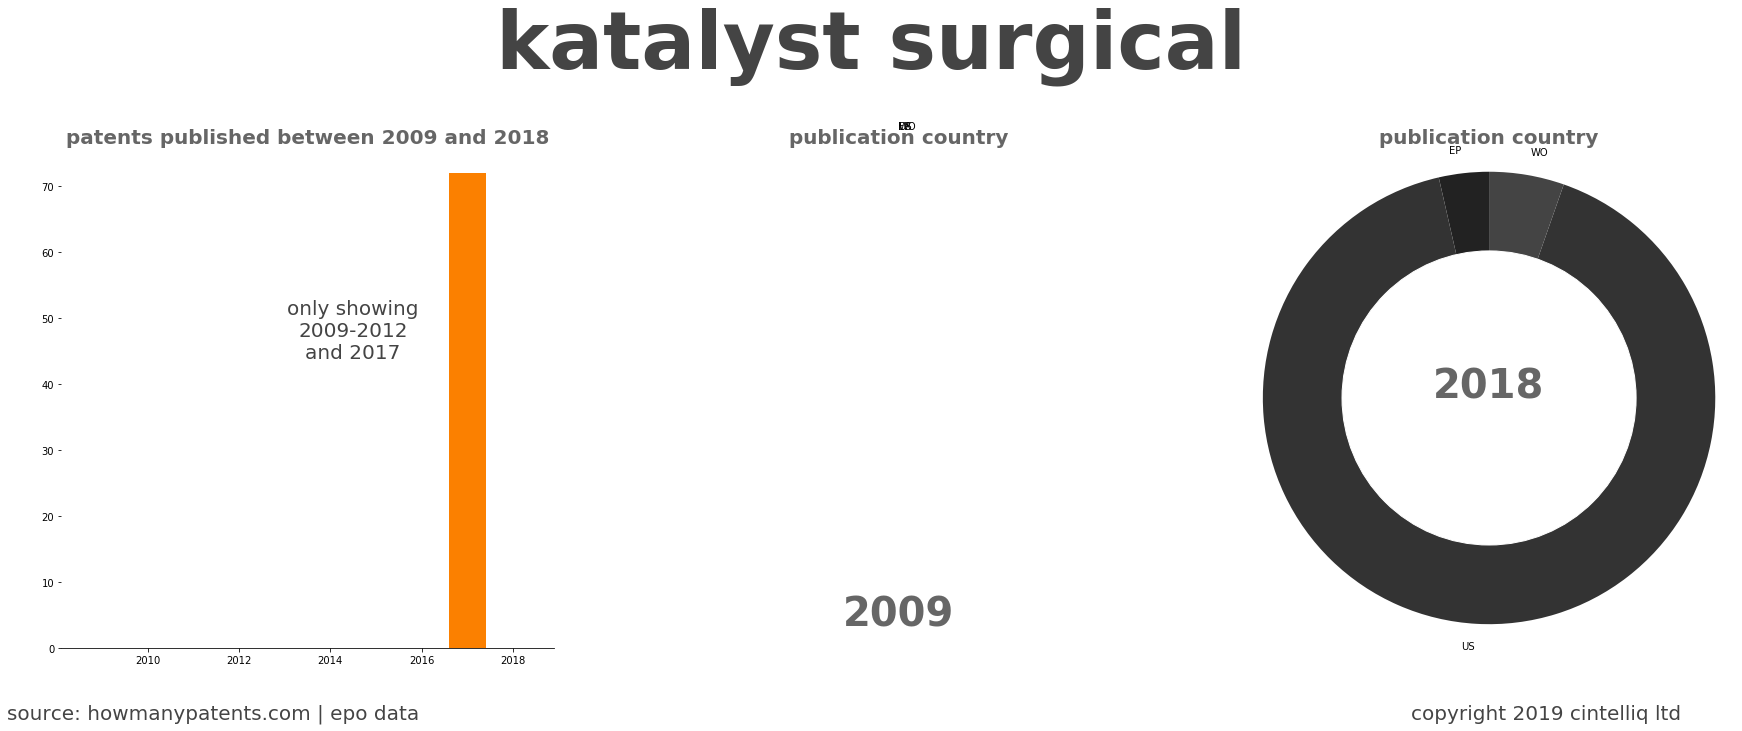 summary of patents for Katalyst Surgical